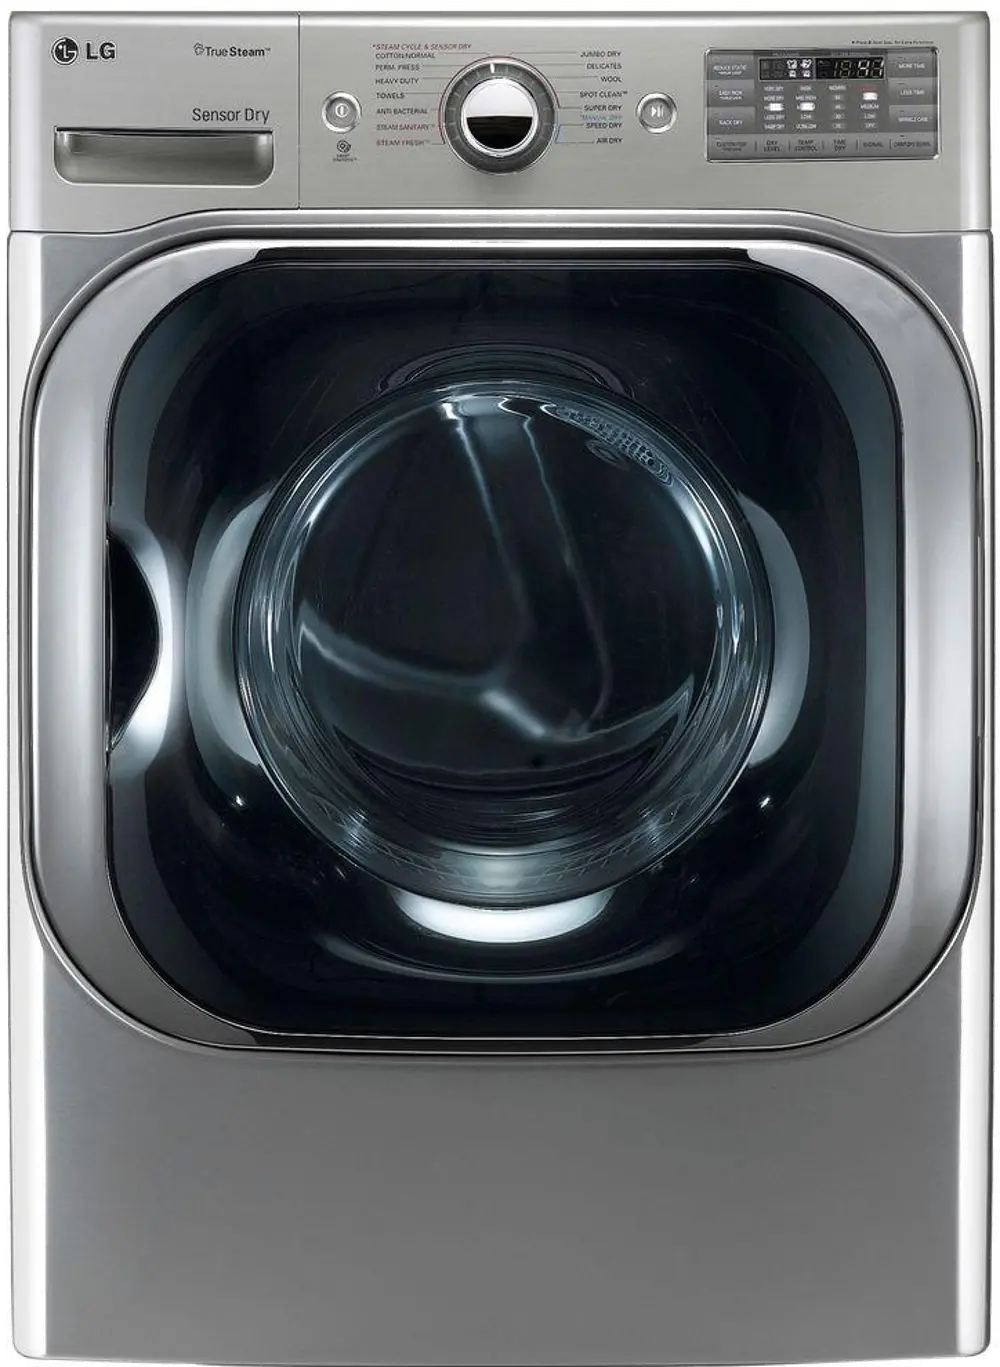 DLEX8100V LG Electric Dryer with Steam Technology - 9.0 cu. ft. Graphite Steel-1